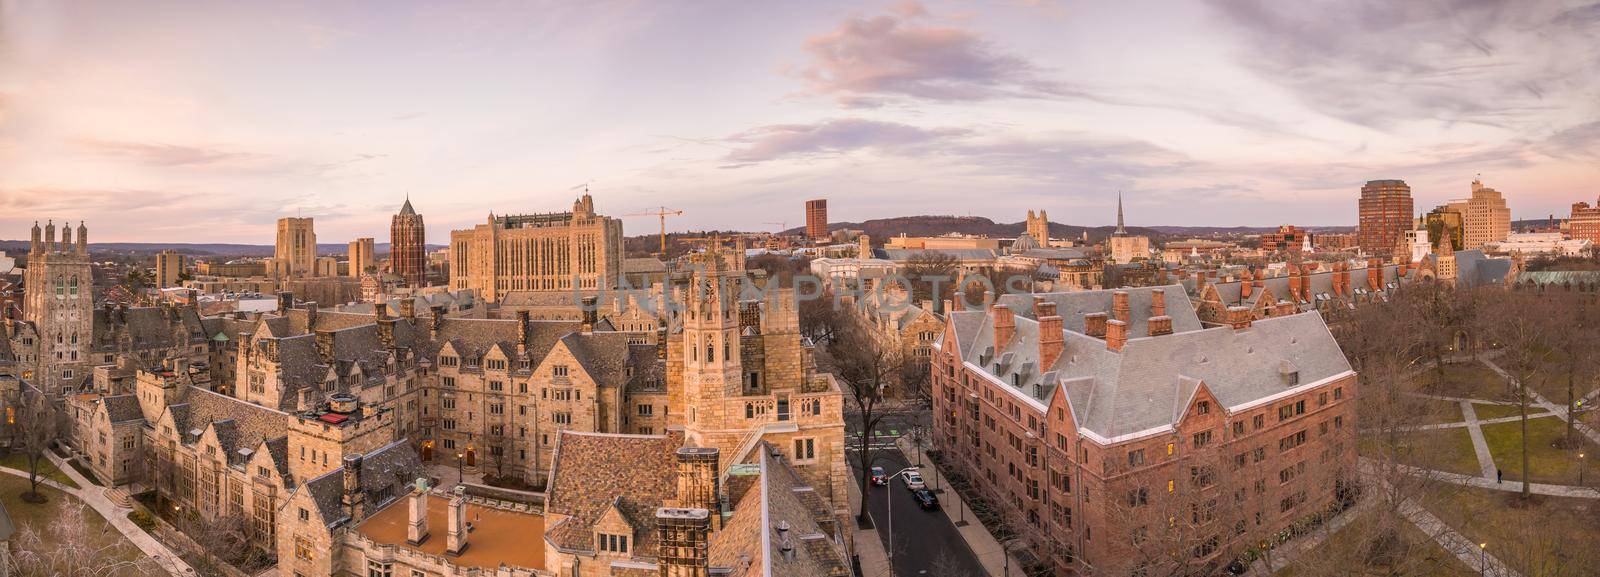 Historical building and Yale university campus by f11photo